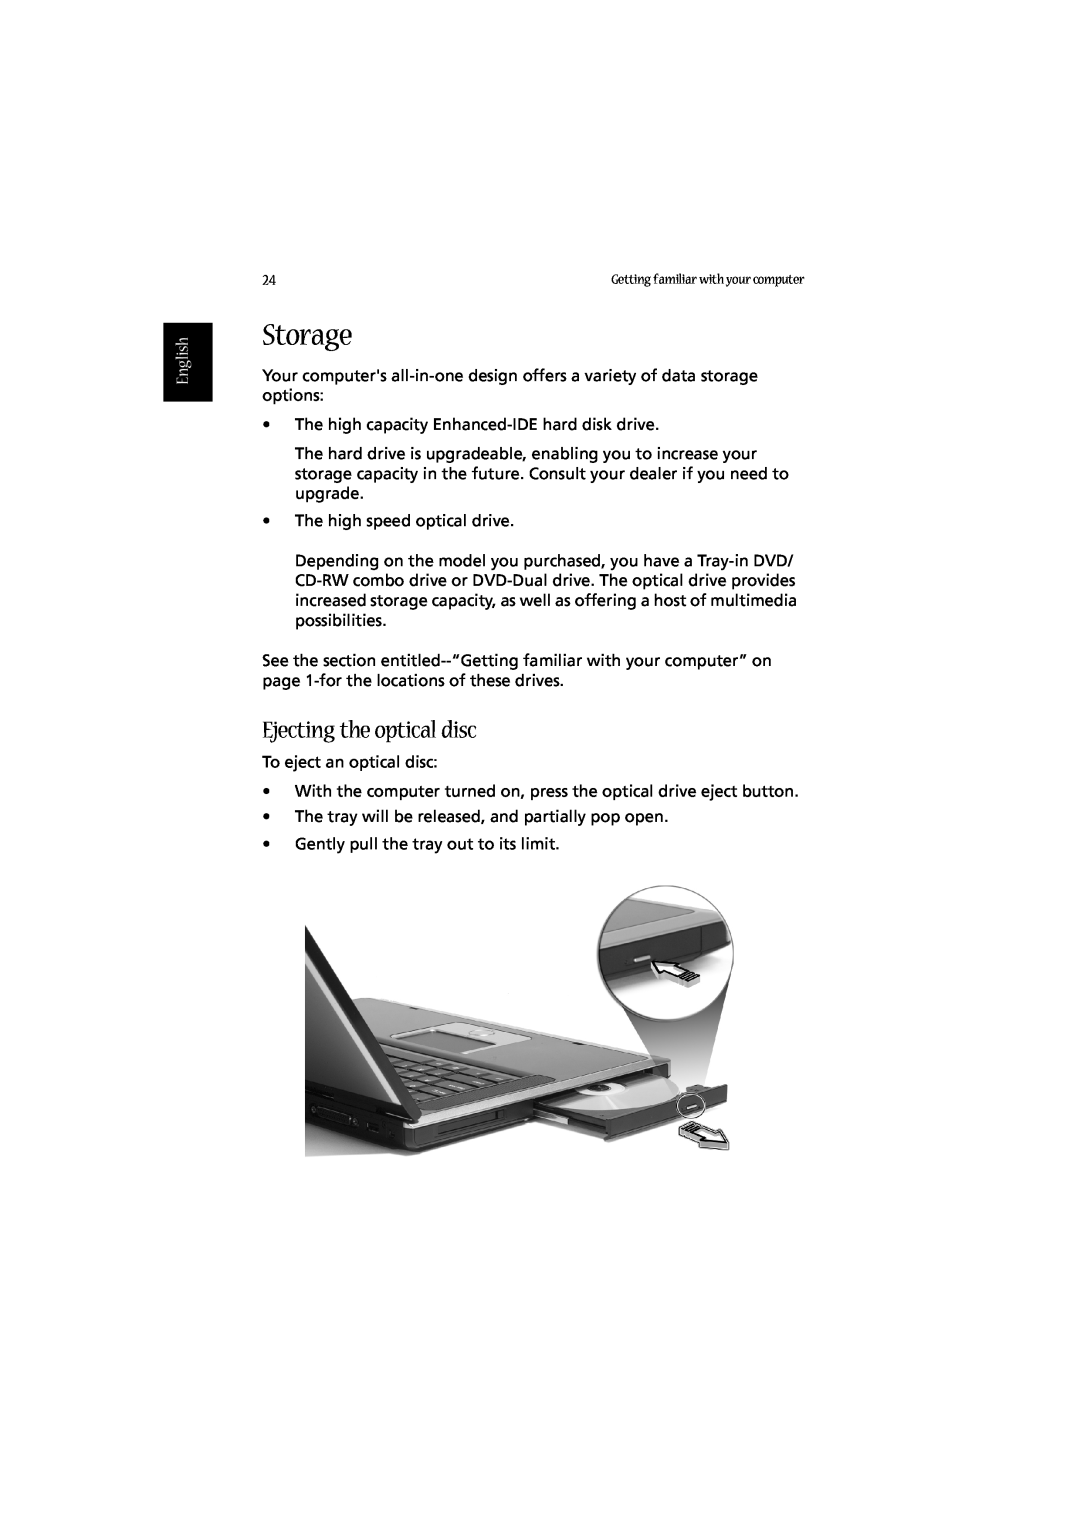 Acer 2010 manual Storage, Ejecting the optical disc, English 